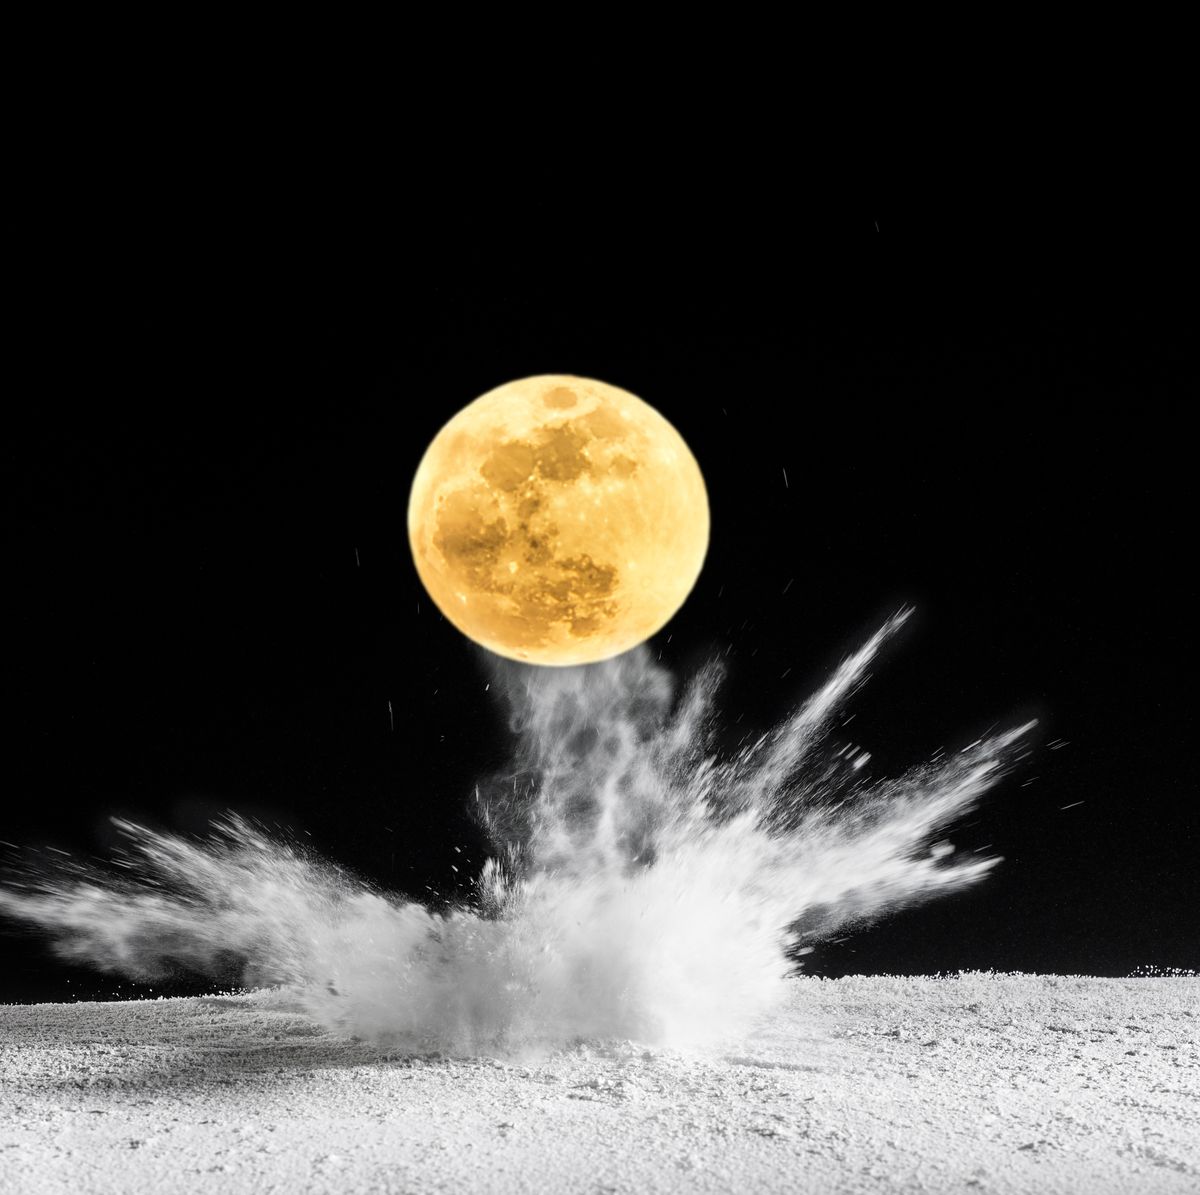 https://hips.hearstapps.com/hmg-prod/images/impact-of-full-moon-on-the-soil-producing-an-royalty-free-image-1675965779.jpg?crop=0.753xw:1.00xh;0.0817xw,0&resize=1200:*